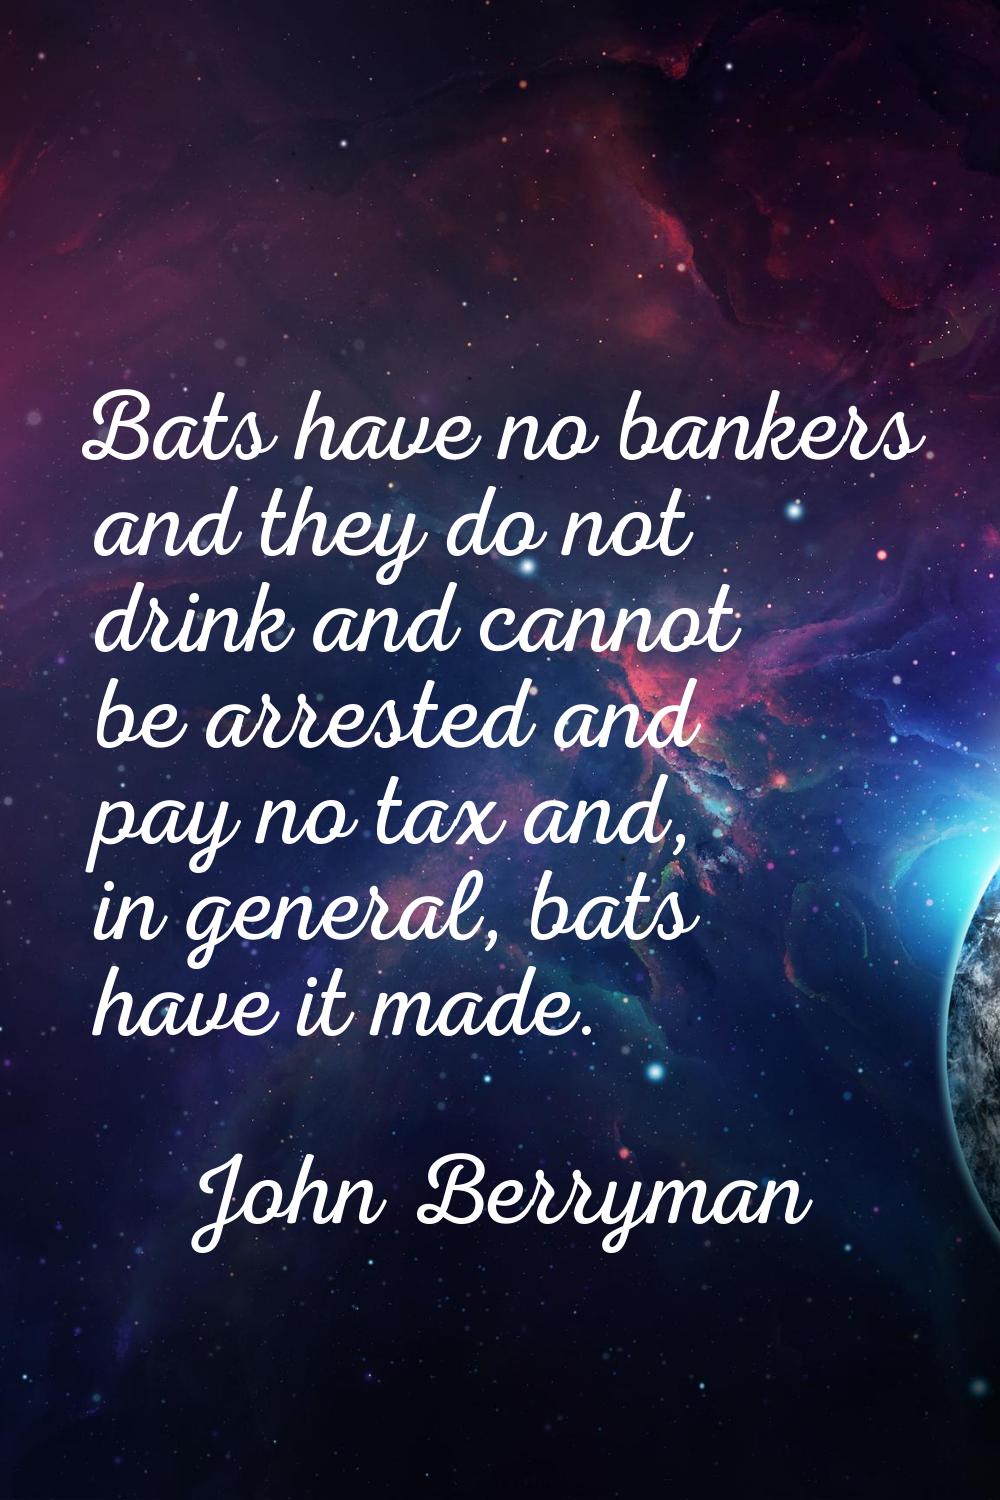 Bats have no bankers and they do not drink and cannot be arrested and pay no tax and, in general, b